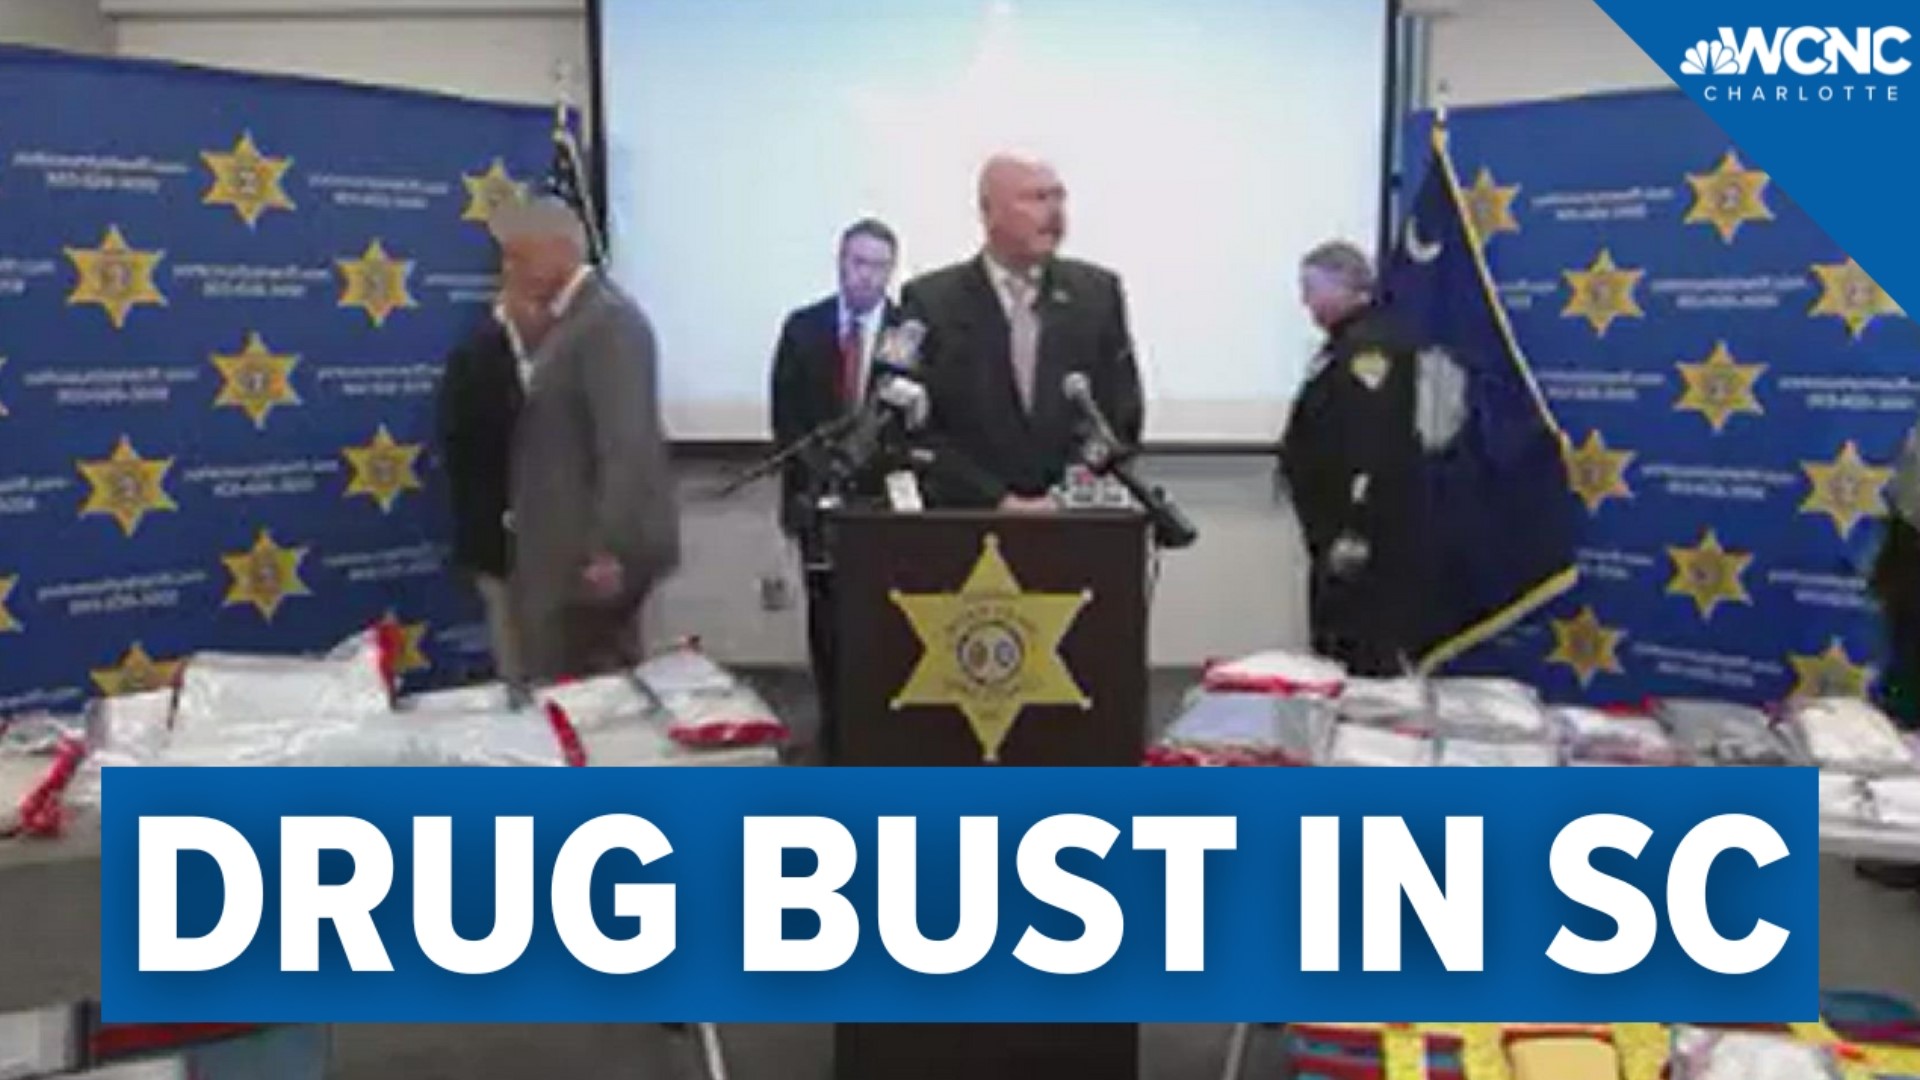 York county officials giving new details about a massive drug bust.